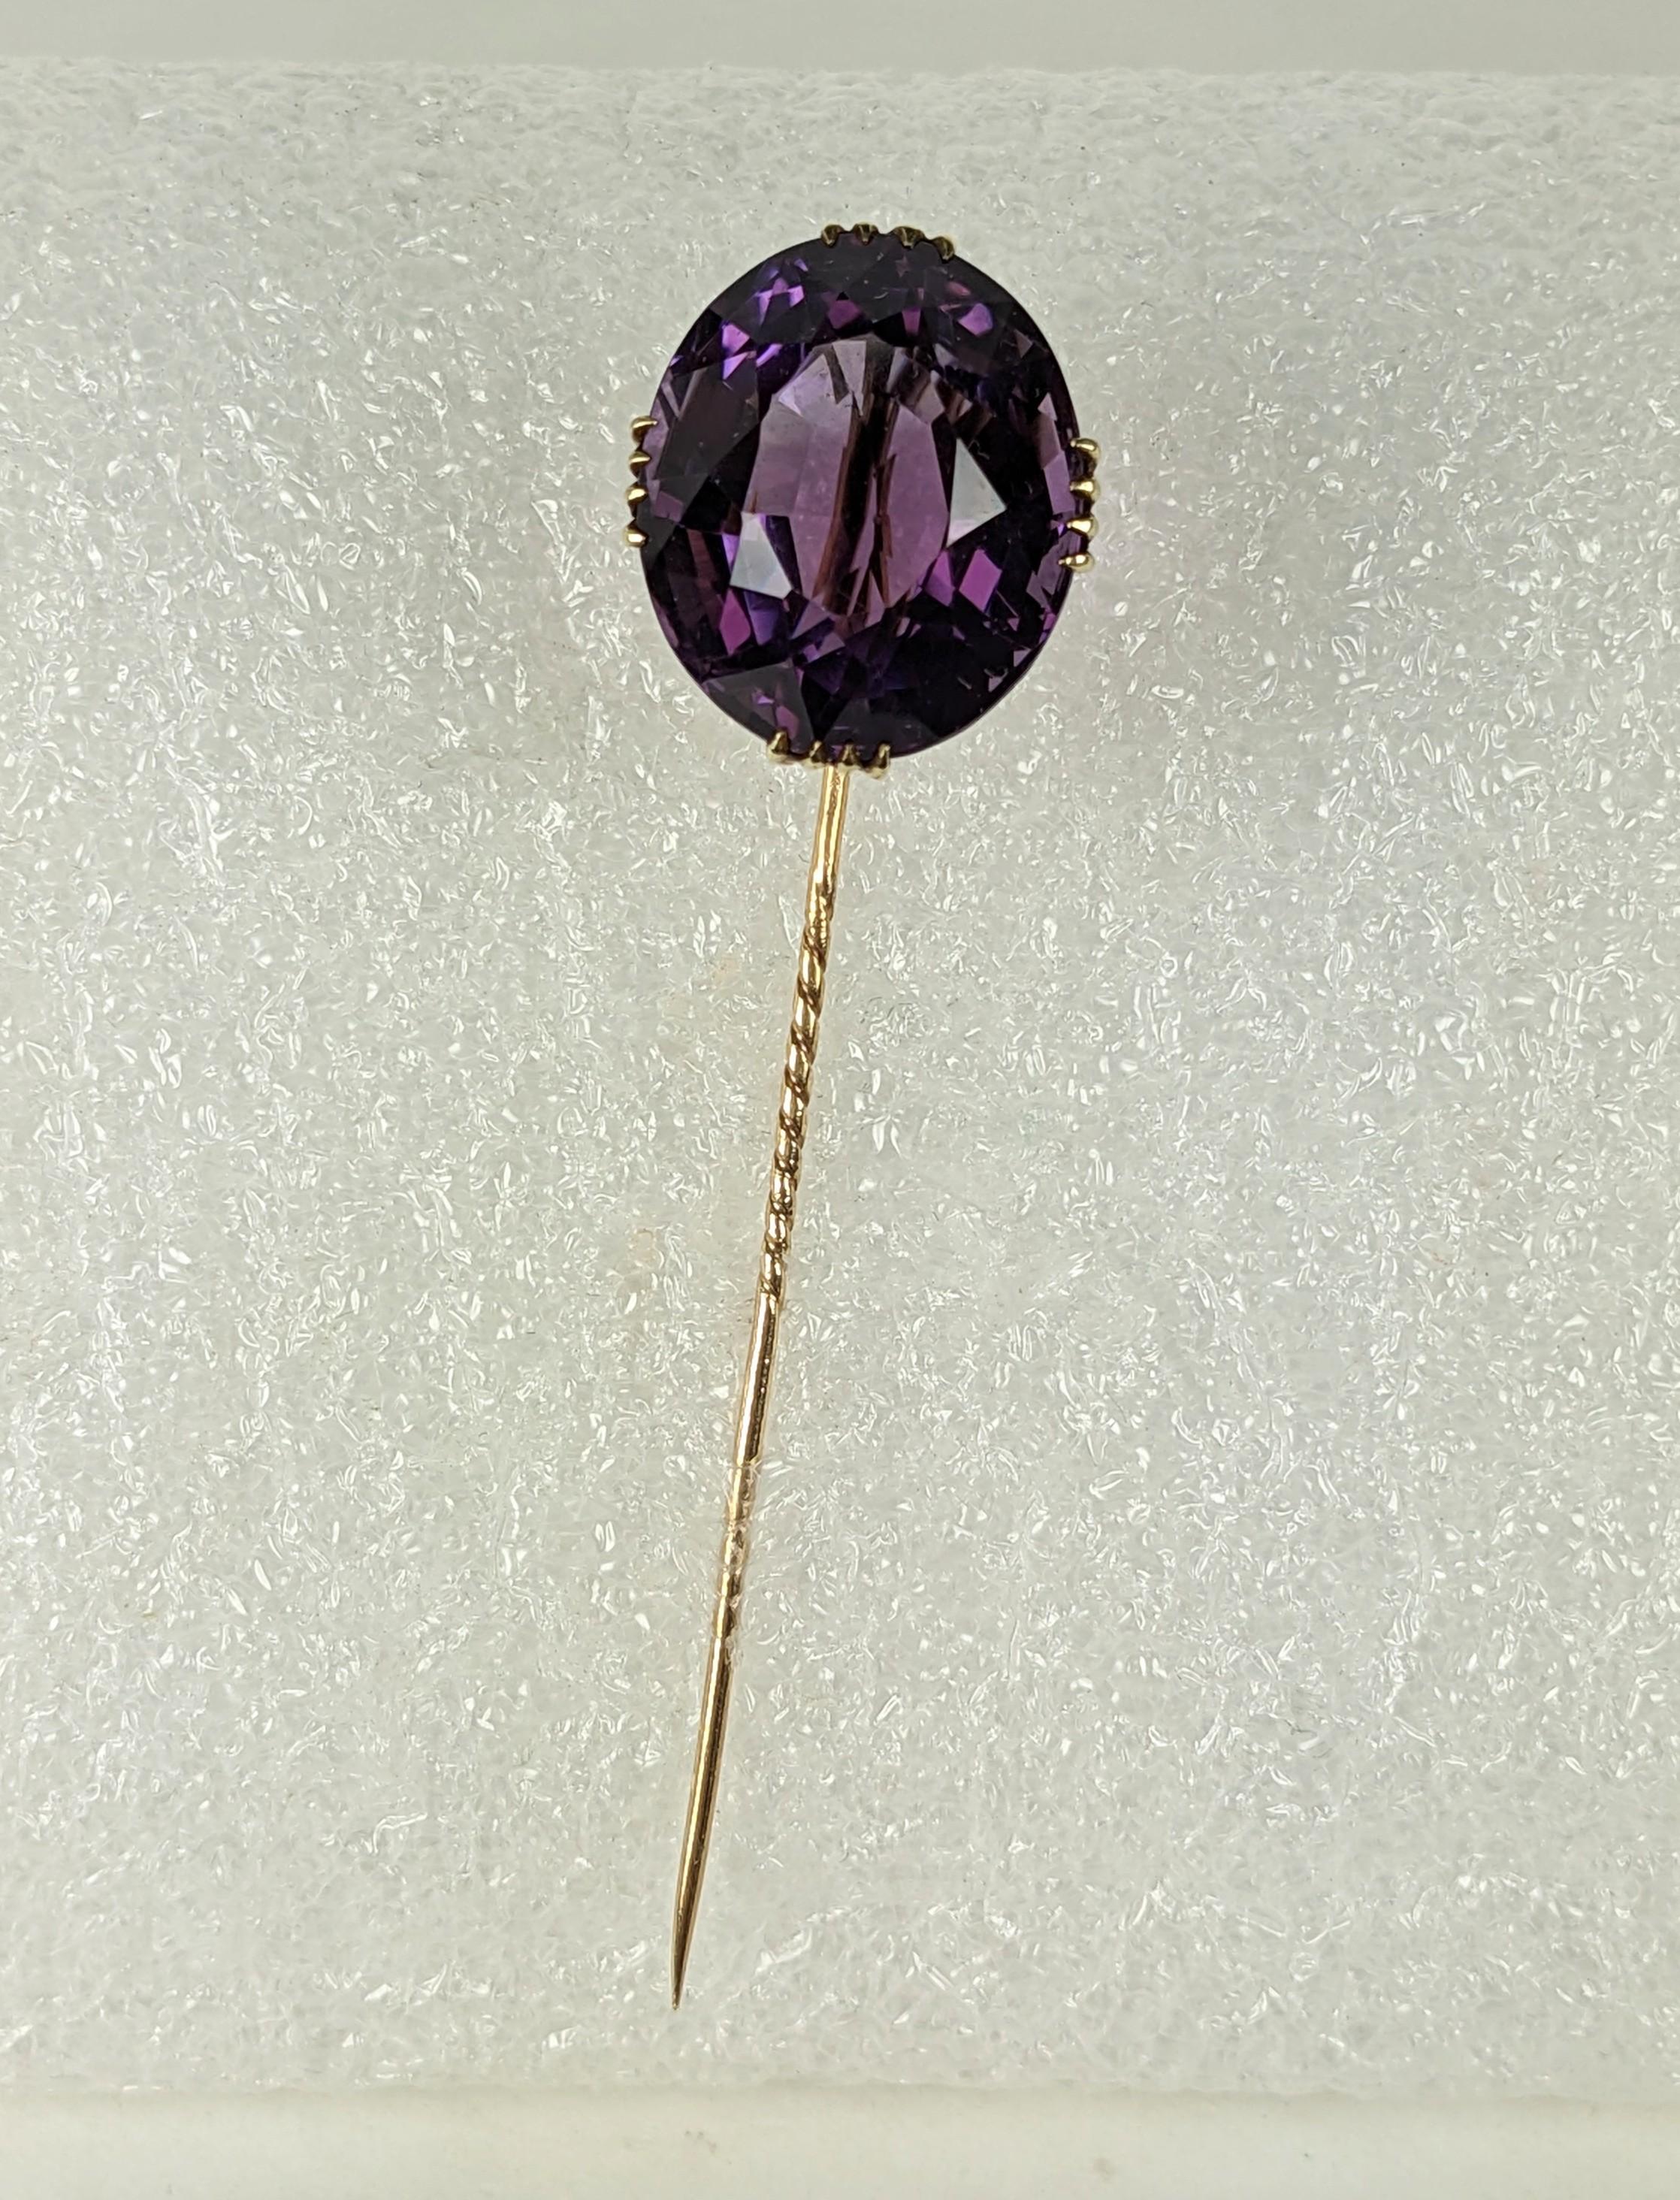 Large Victorian Amythest Stickpin set in ornate 14k gold setting. Large high quality oval cut amythest  with intense color, measuring 20mm x 18mm. Gorgeous hand etched surround with tapered prongs. Marked 14K on staff. 1880's USA. 3